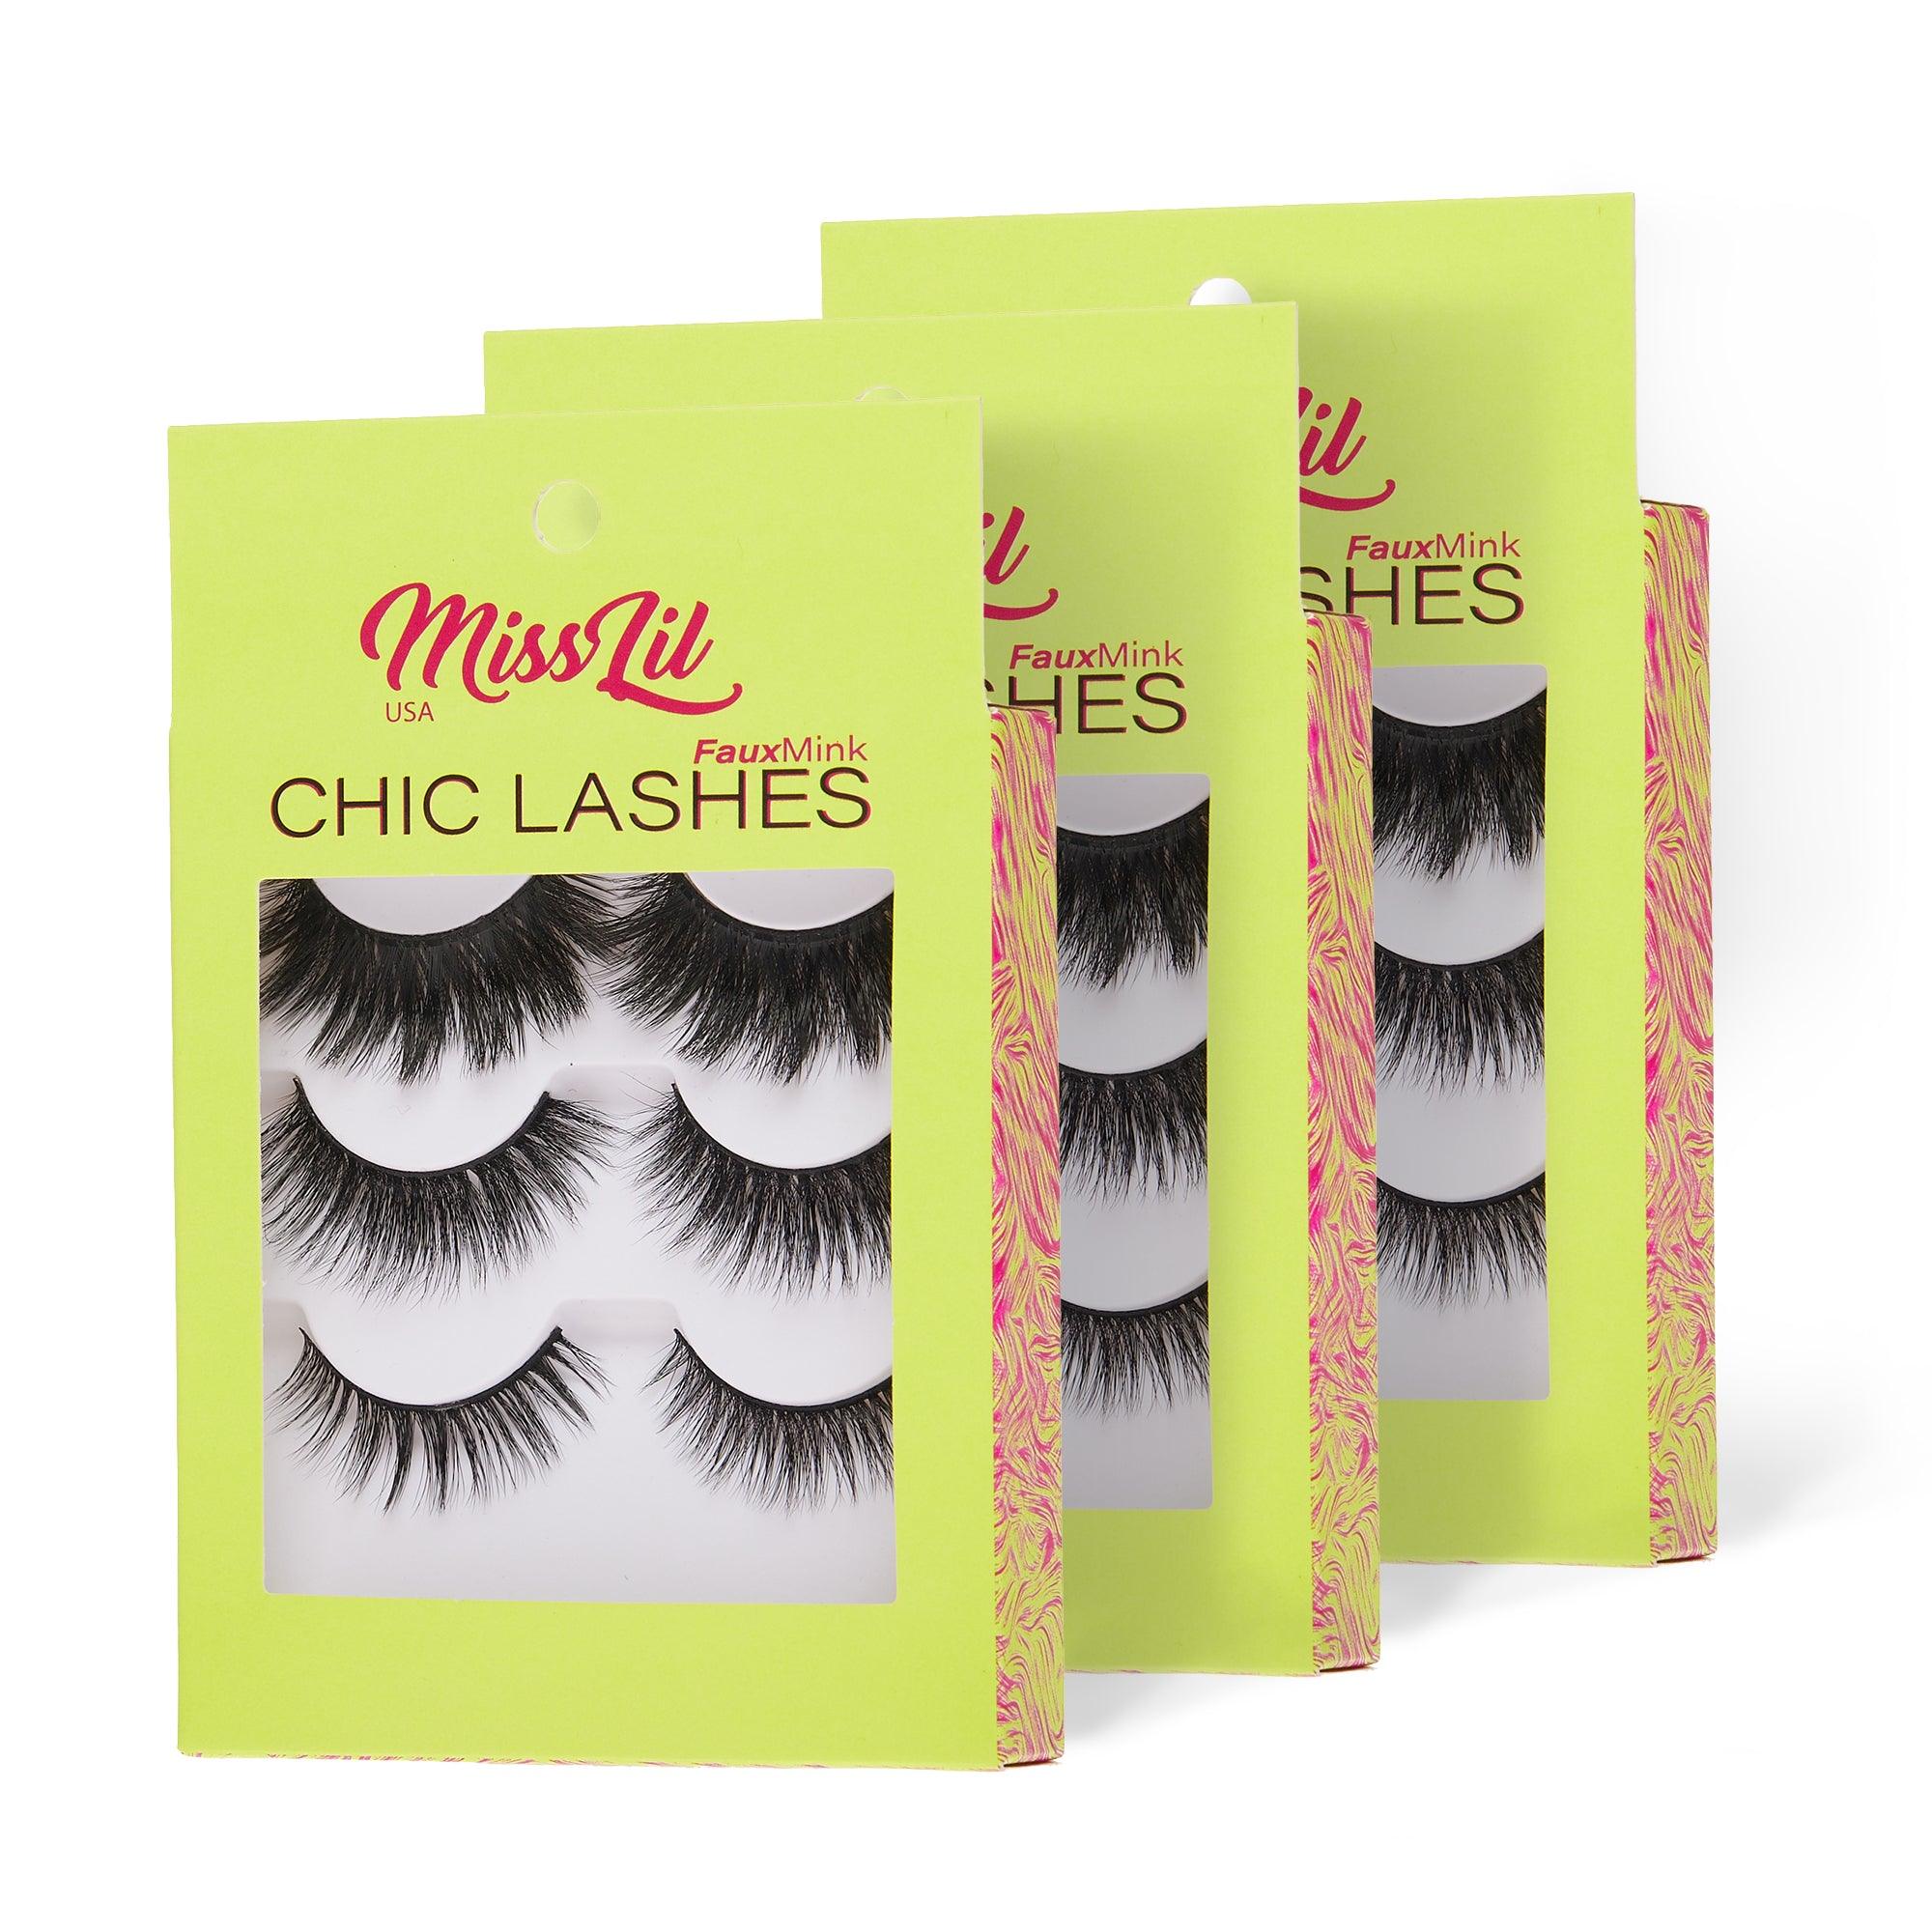 3-Pair Faux Mink Eyelashes - Chic Lashes Collection #40 - Miss Lil USA